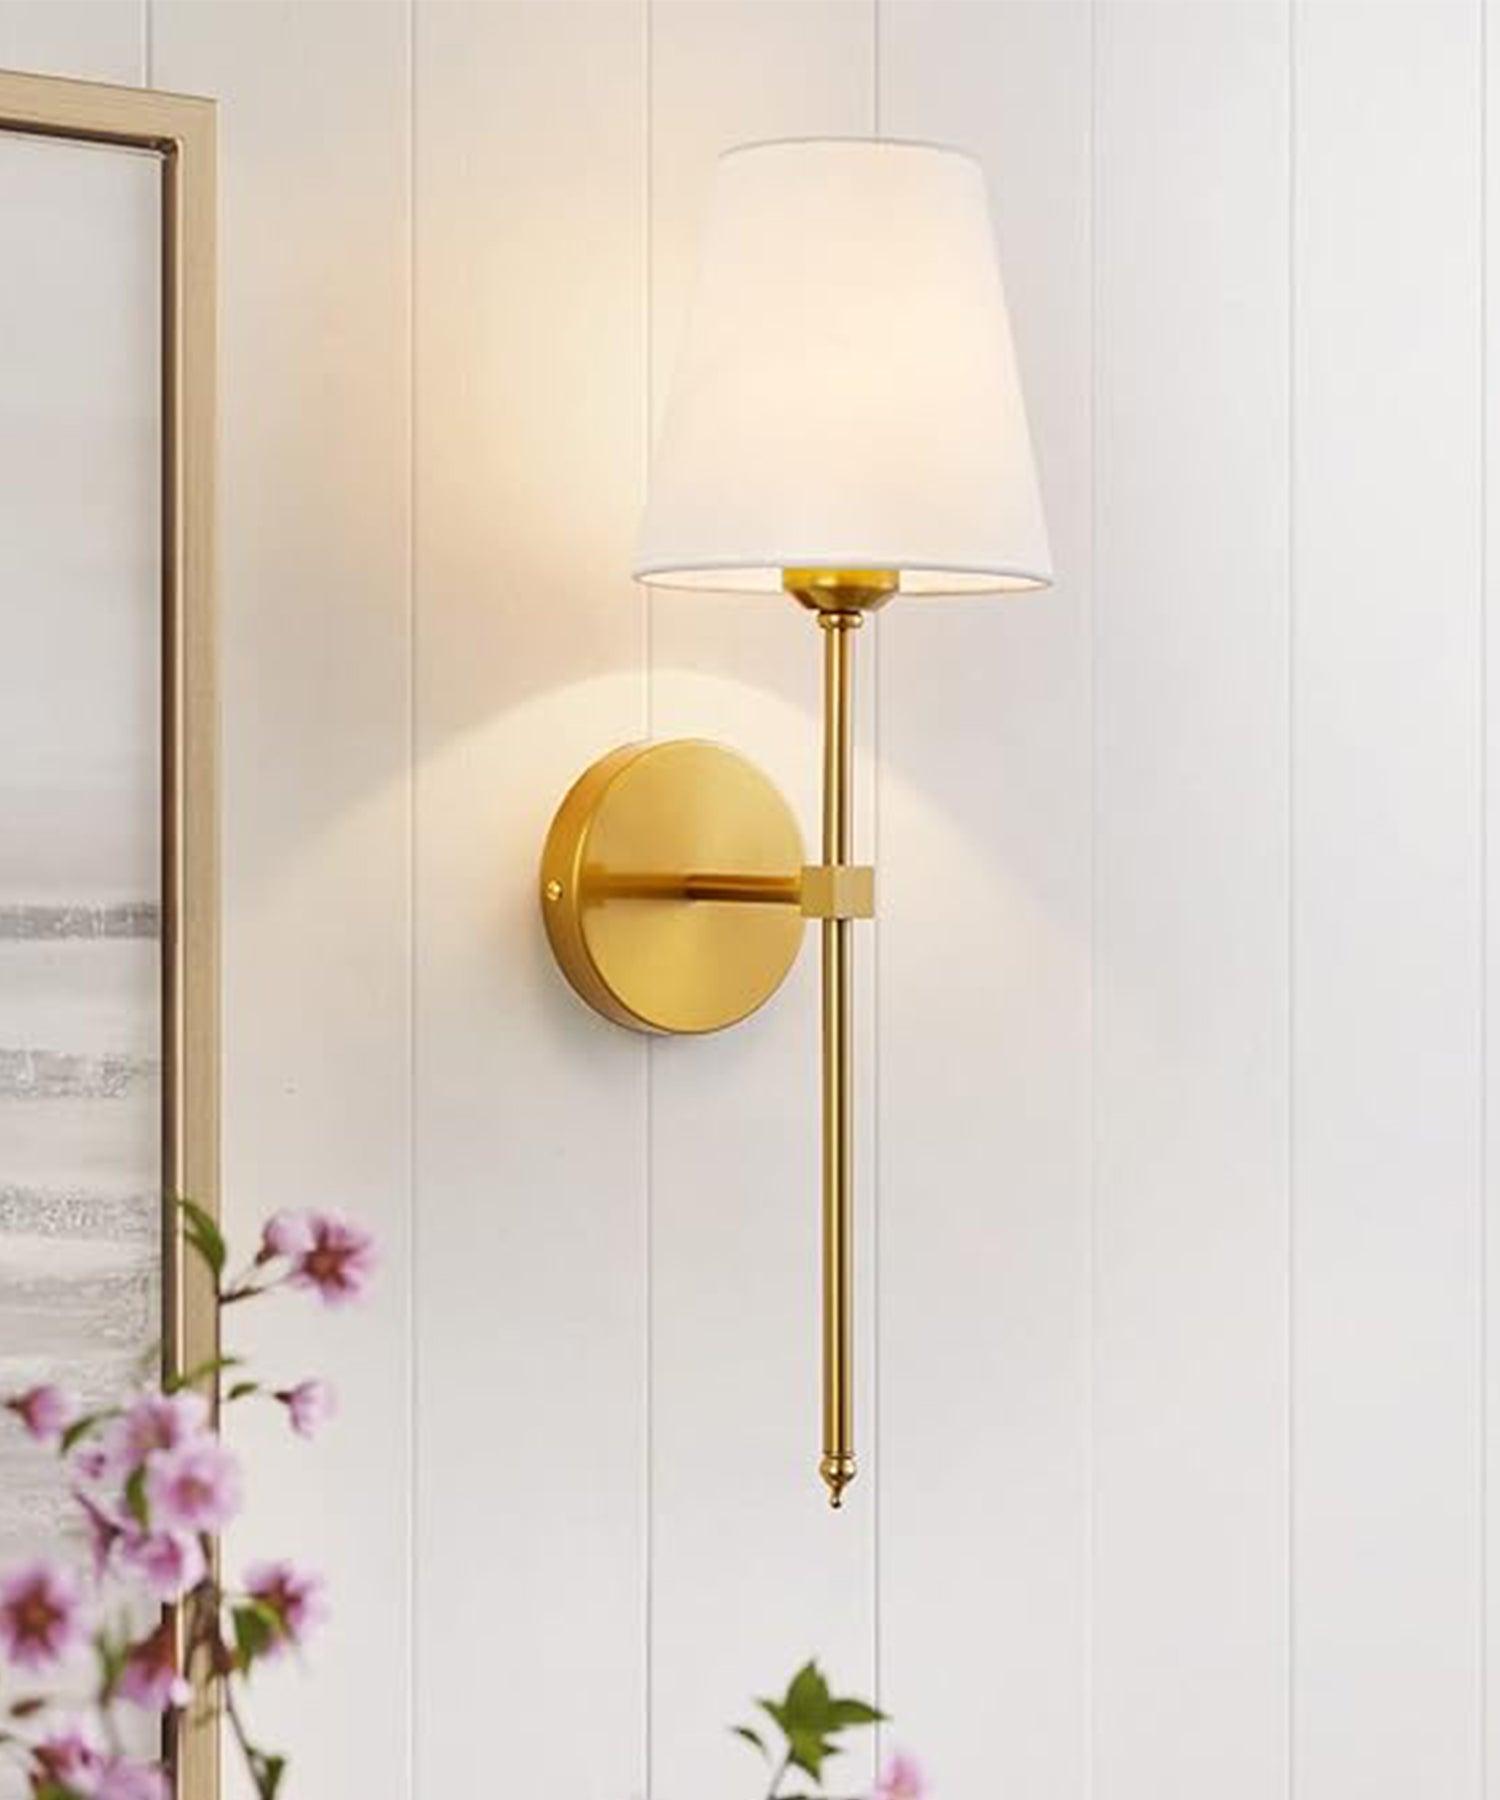 Wall Sconces On Sale - Bees Lighting